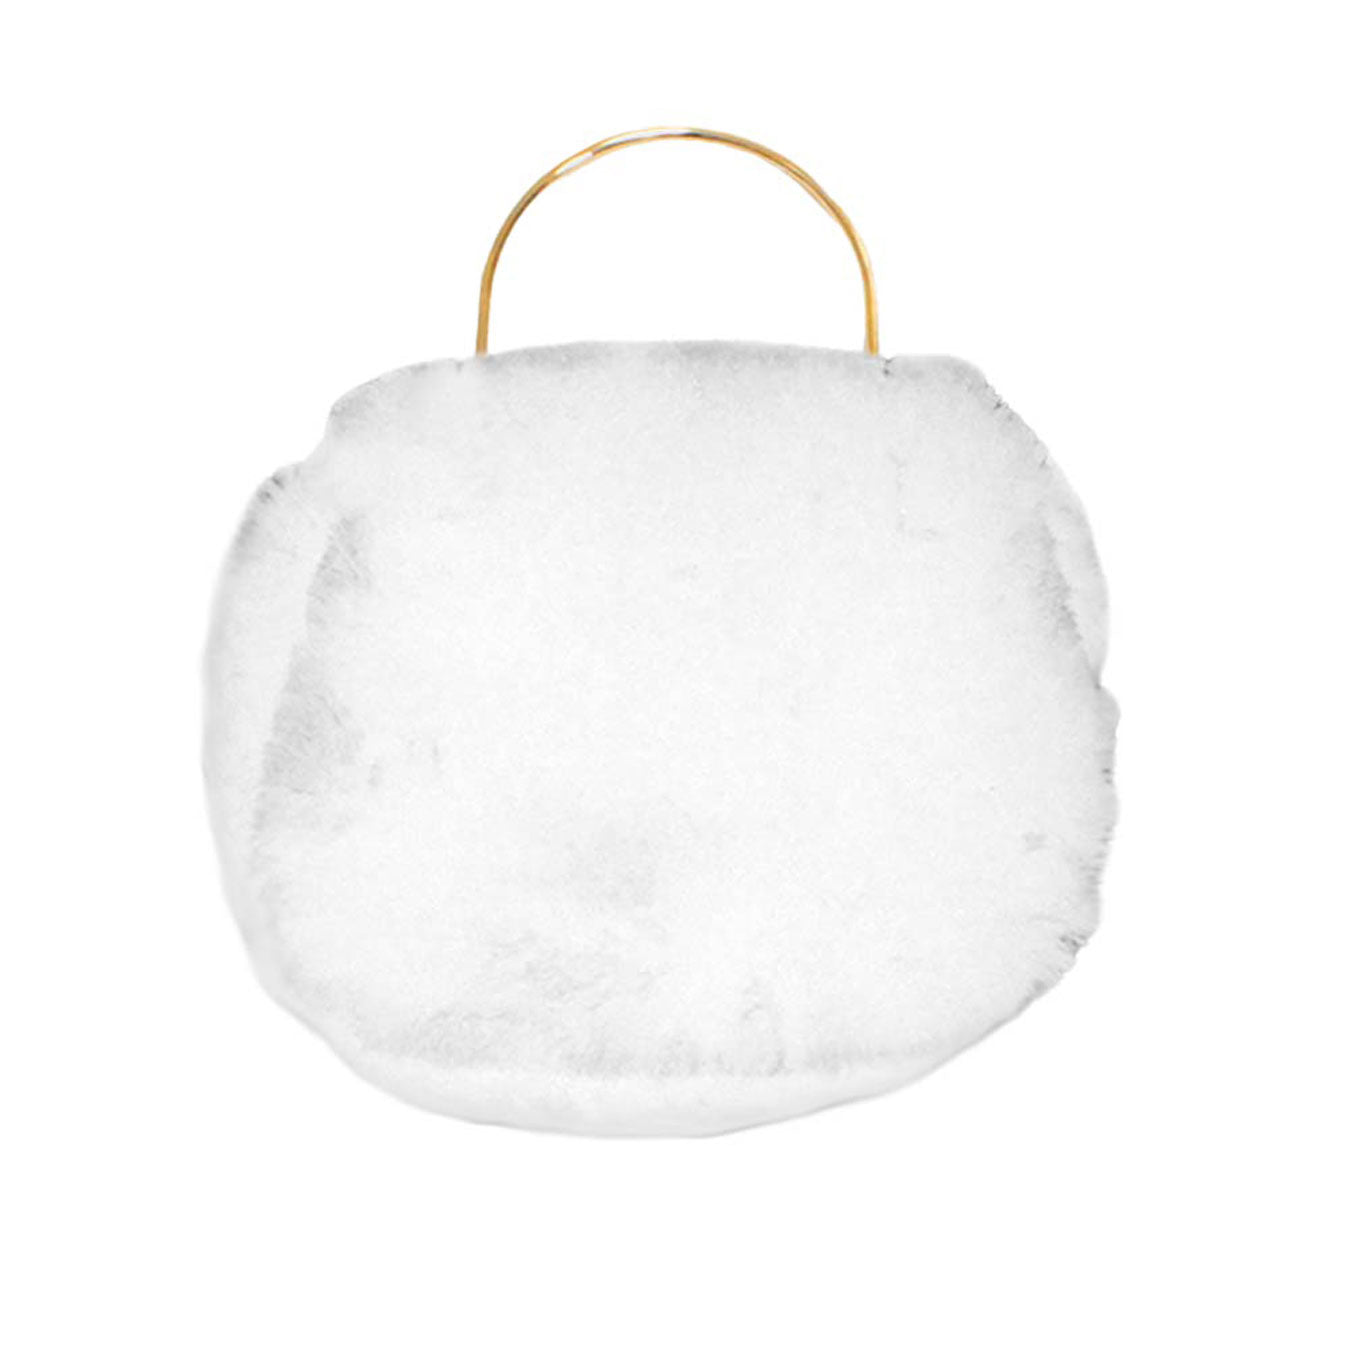 White Solid Faux Fur Tote Crossbody Bag. This high quality Tote Crossbody Bag is both unique and stylish. Suitable for money, credit cards, keys or coins and many more things, light and gorgeous. perfectly lightweight to carry around all day. Look like the ultimate fashionista carrying this trendy faux fur Tote Crossbody Bag! Perfect Birthday Gift, Anniversary Gift, Mother's Day Gift, Graduation Gift, Valentine's Day Gift.